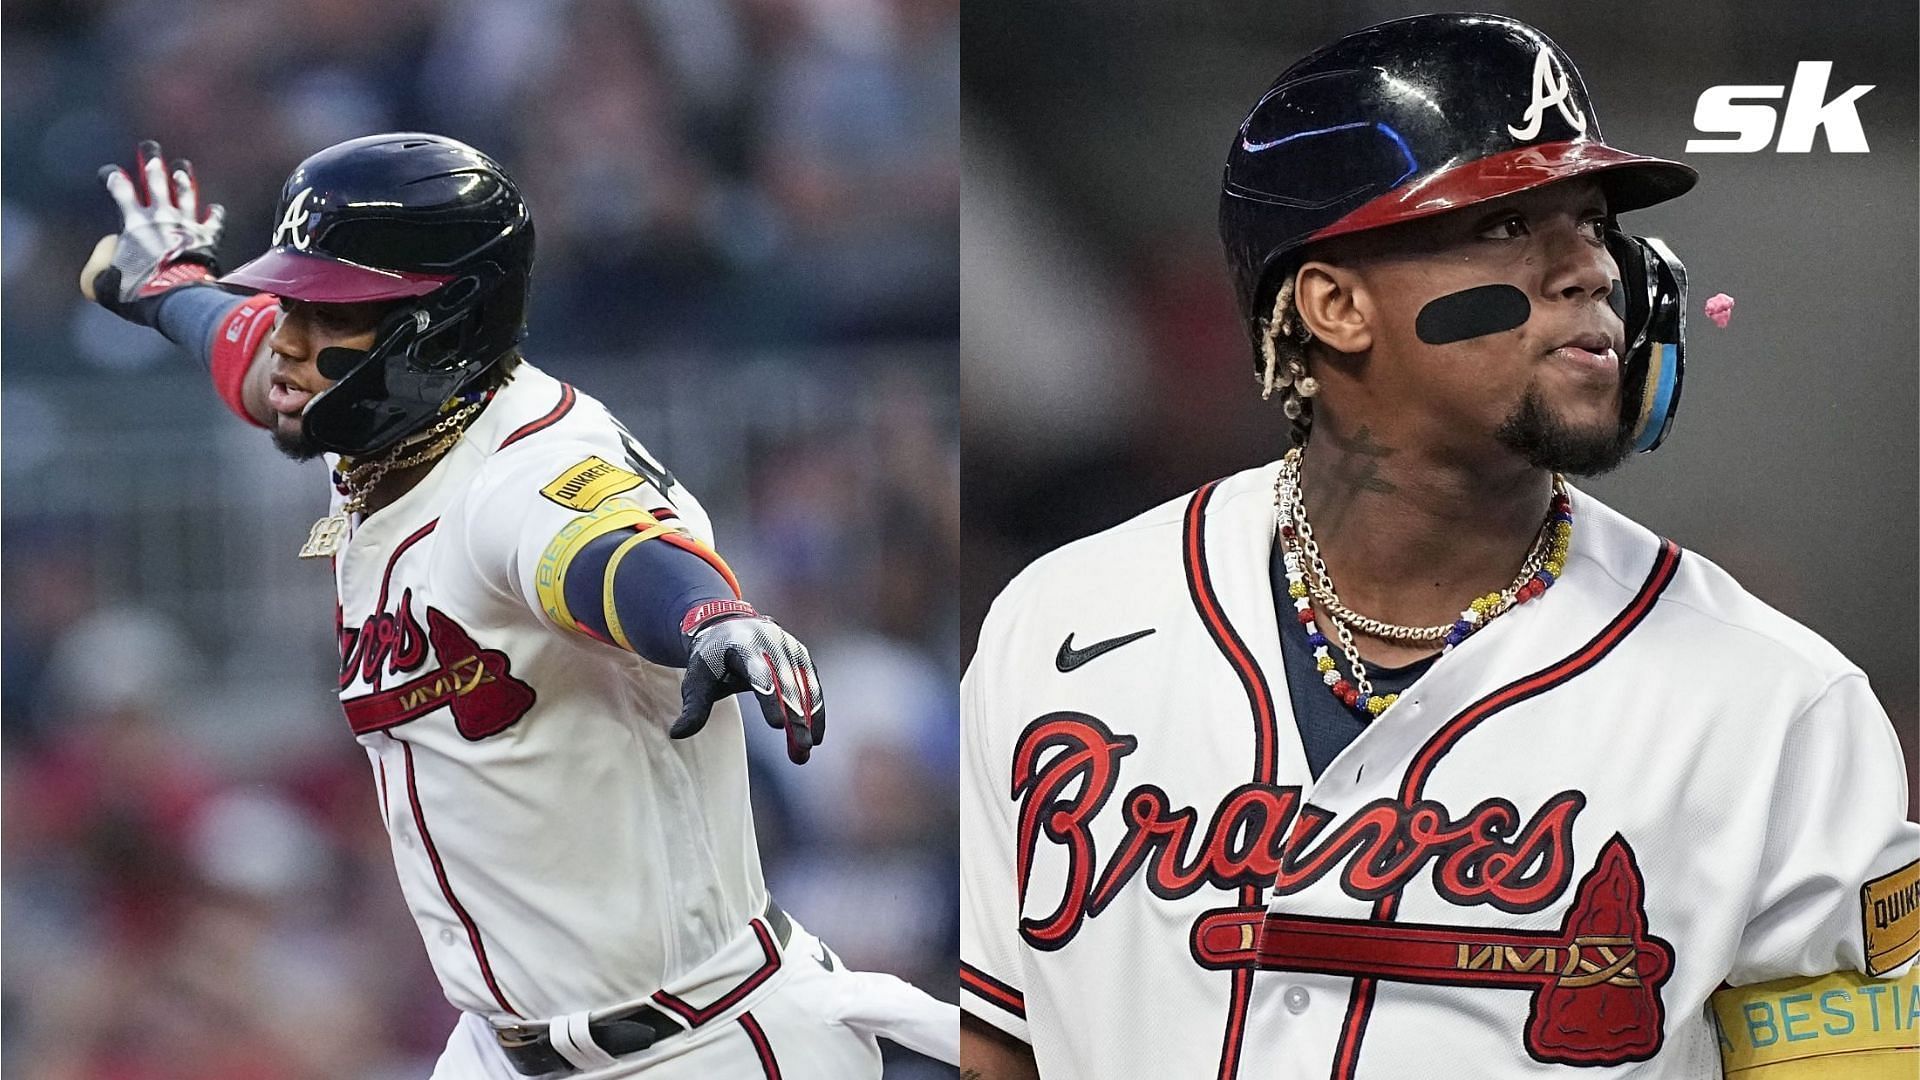 Braves star Ronald Acuna Jr. promises a different ending to next season